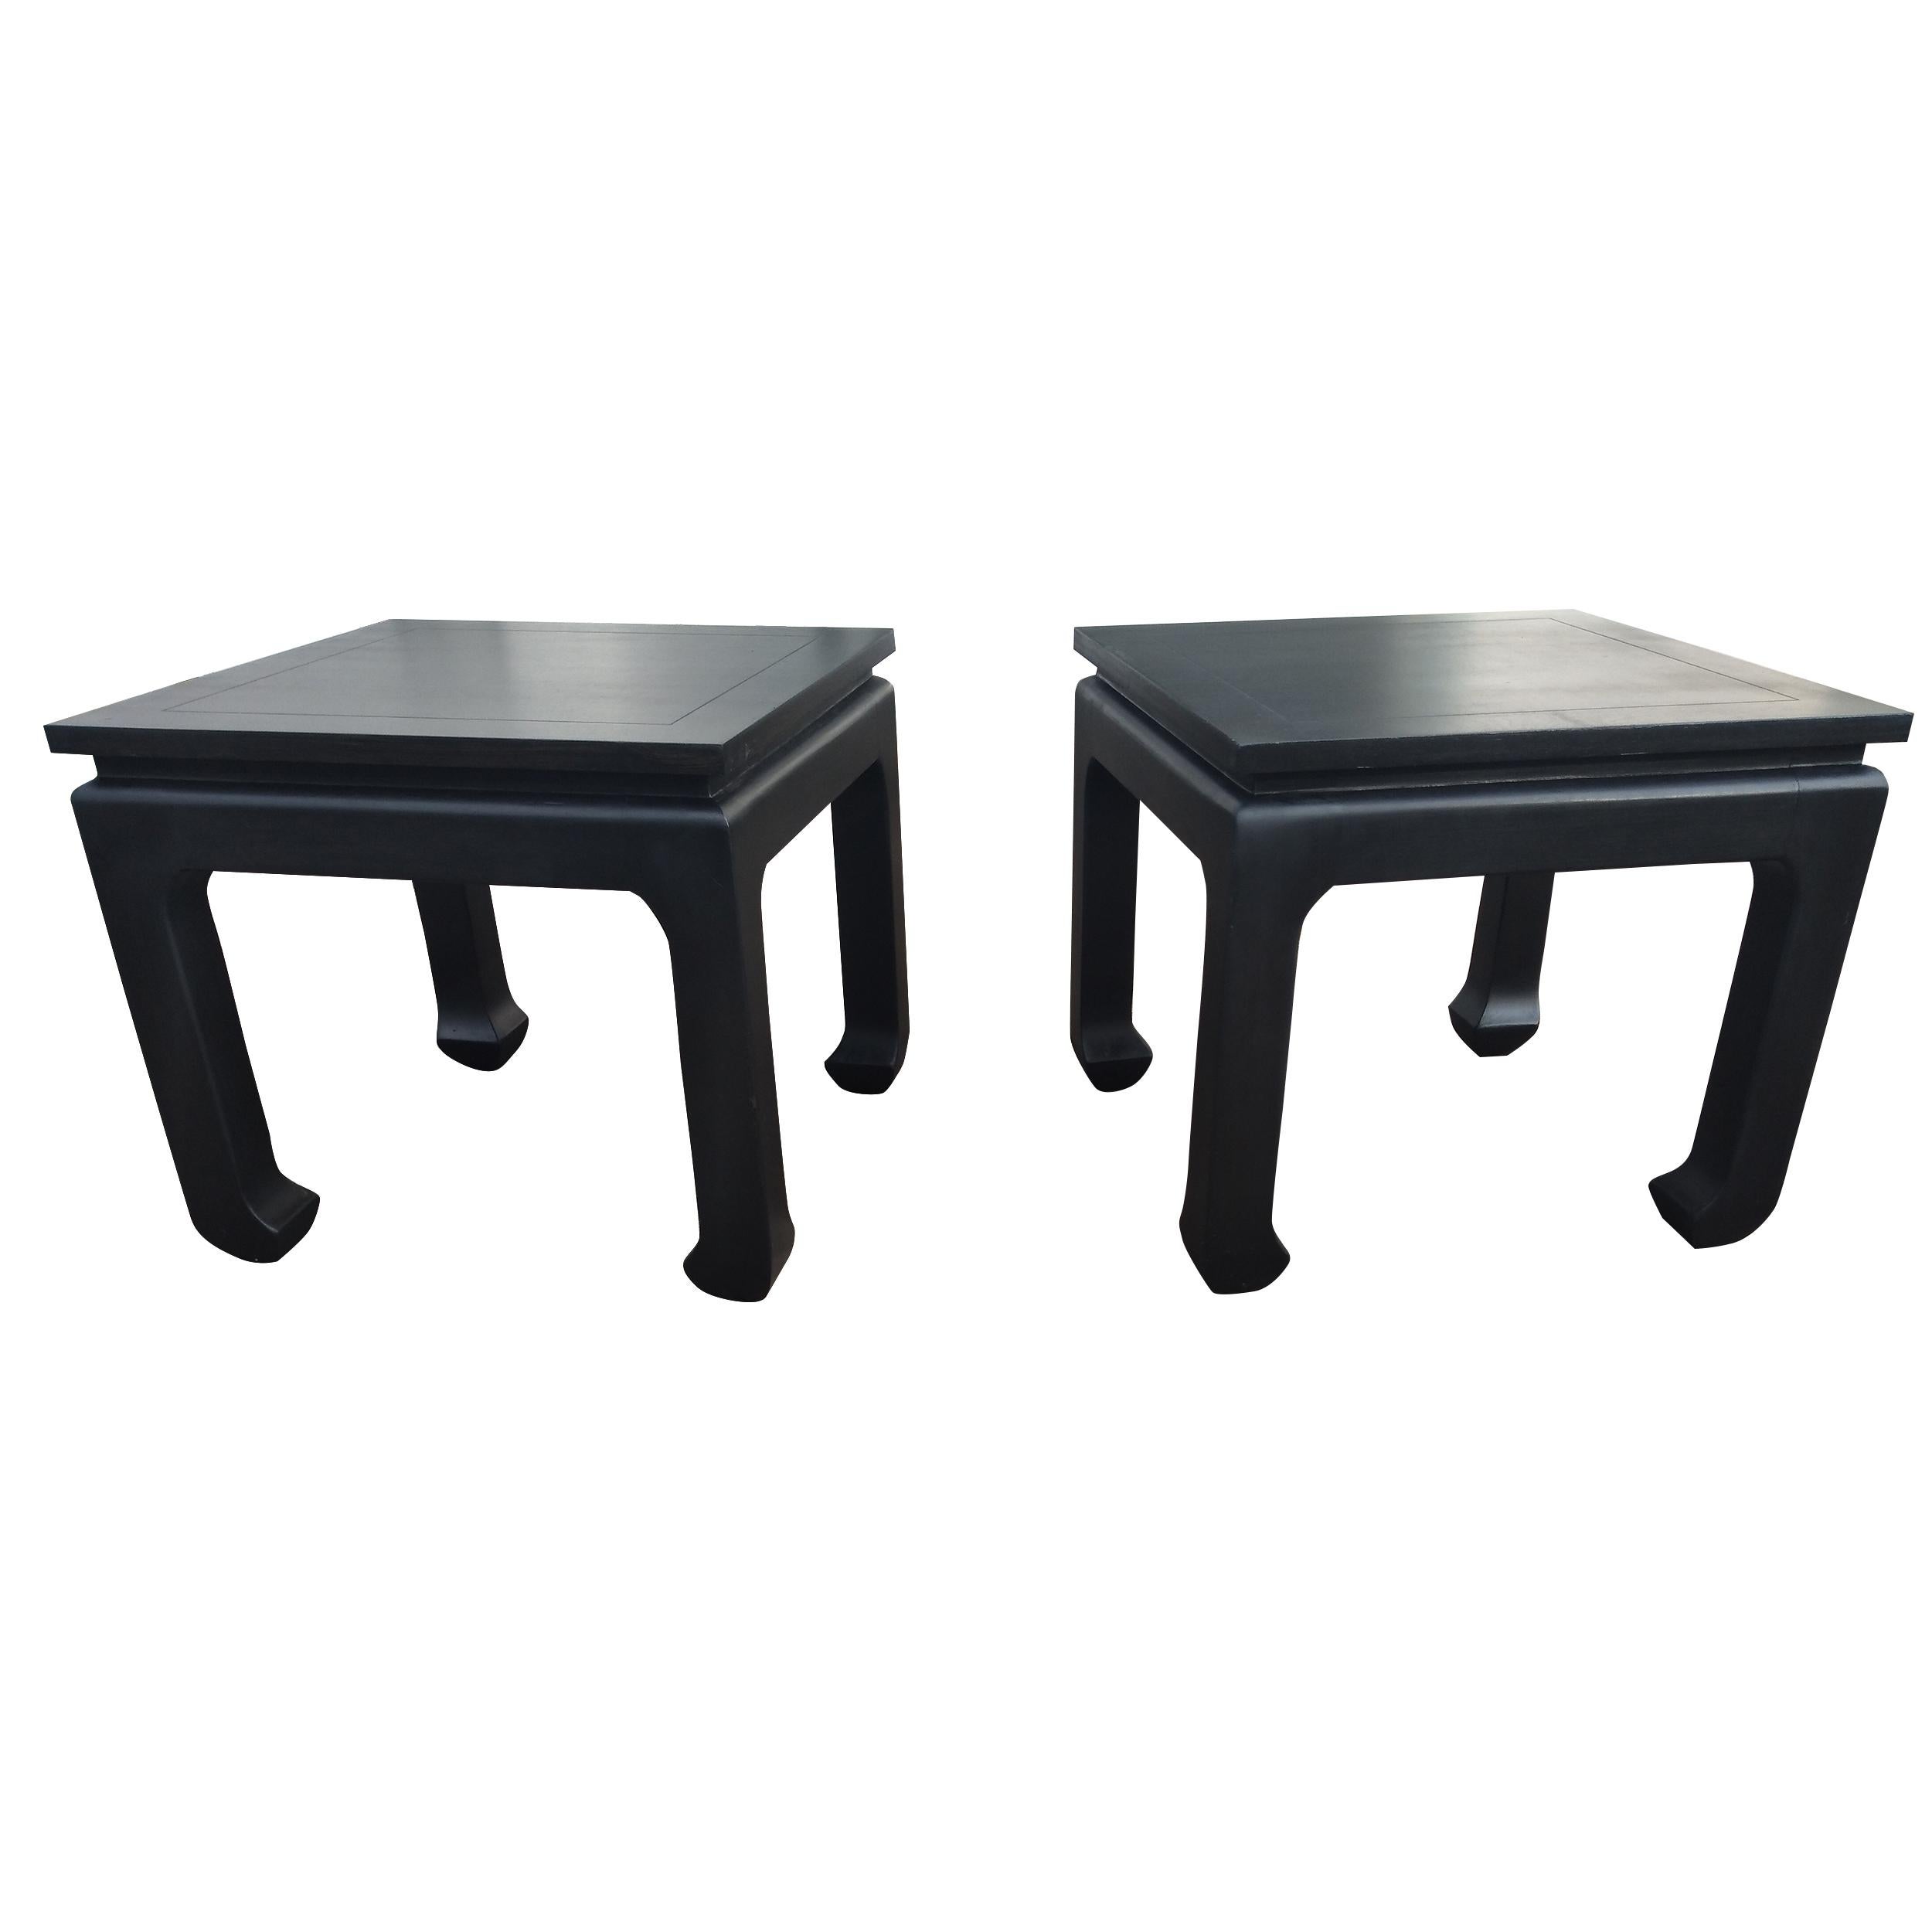 Pair of Ebonized ming style side tables

Chinoiserie style side tables, from mid to late-20th century. Ebonized finish with Ming style legs and recessed aprons.
We have a large coffee table available as well. See photos.


